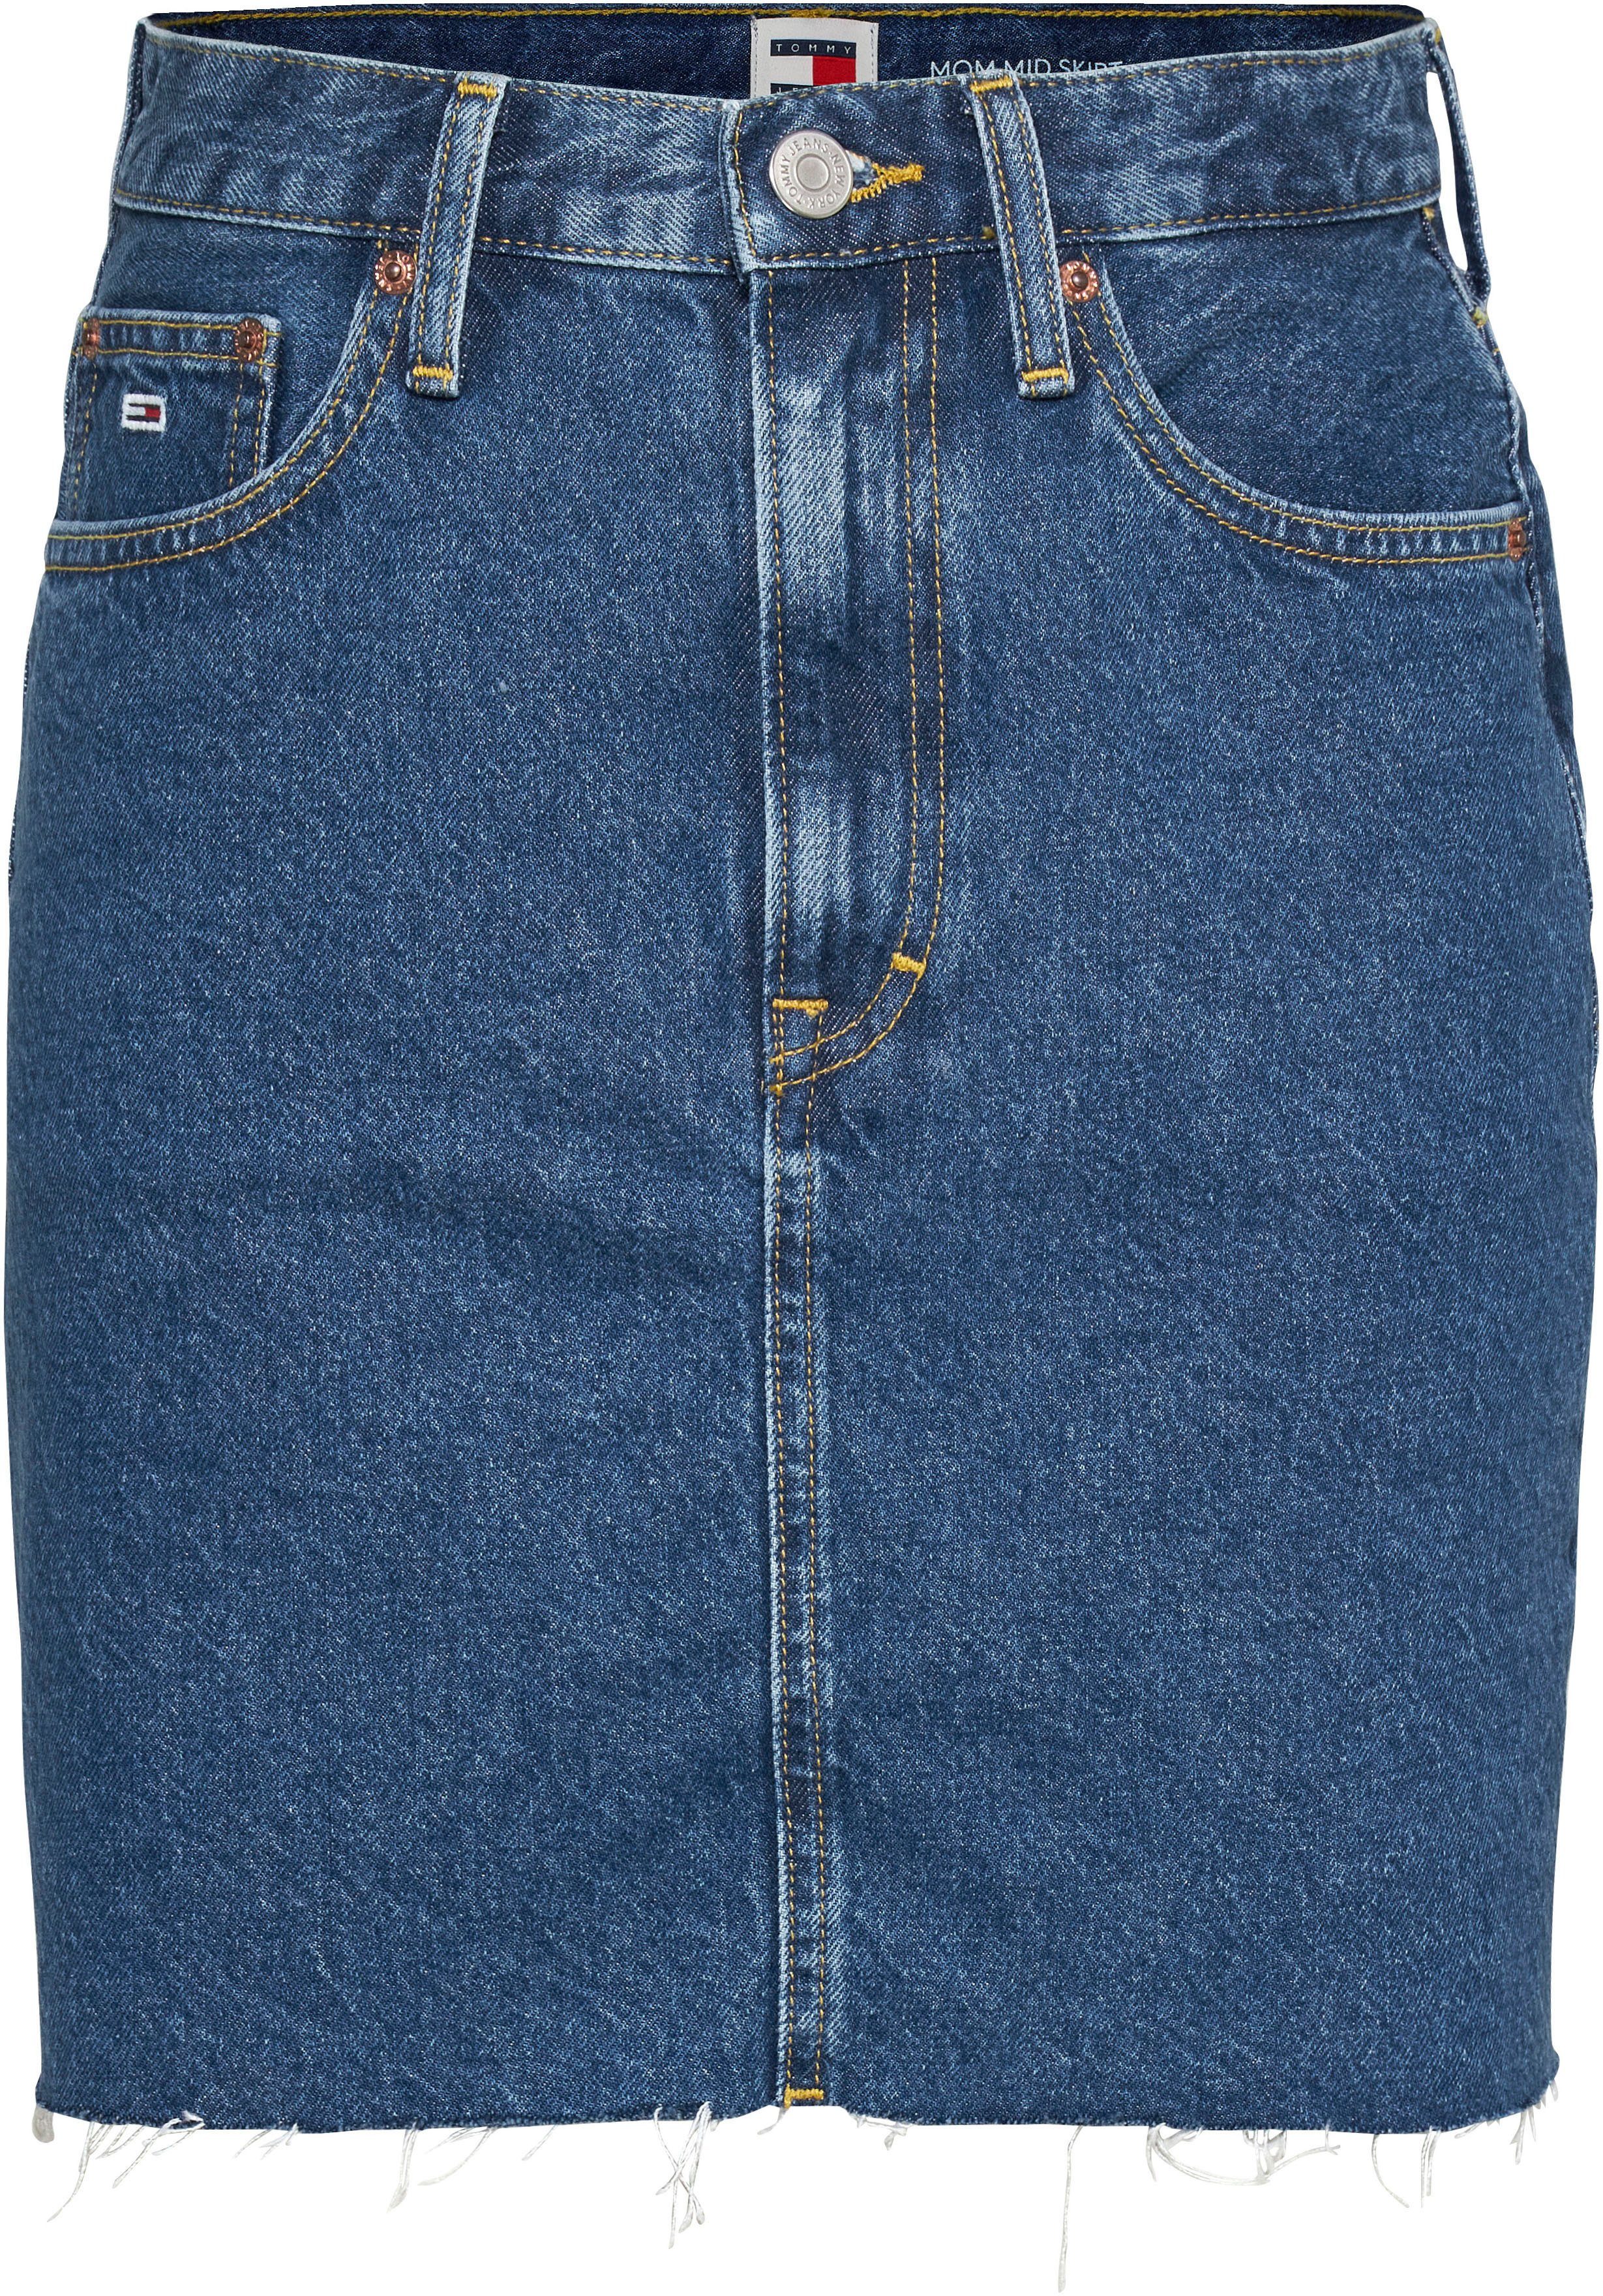 Jeansrock AH4035 MOM Jeans UH SKIRT Logostickerei mit Tommy